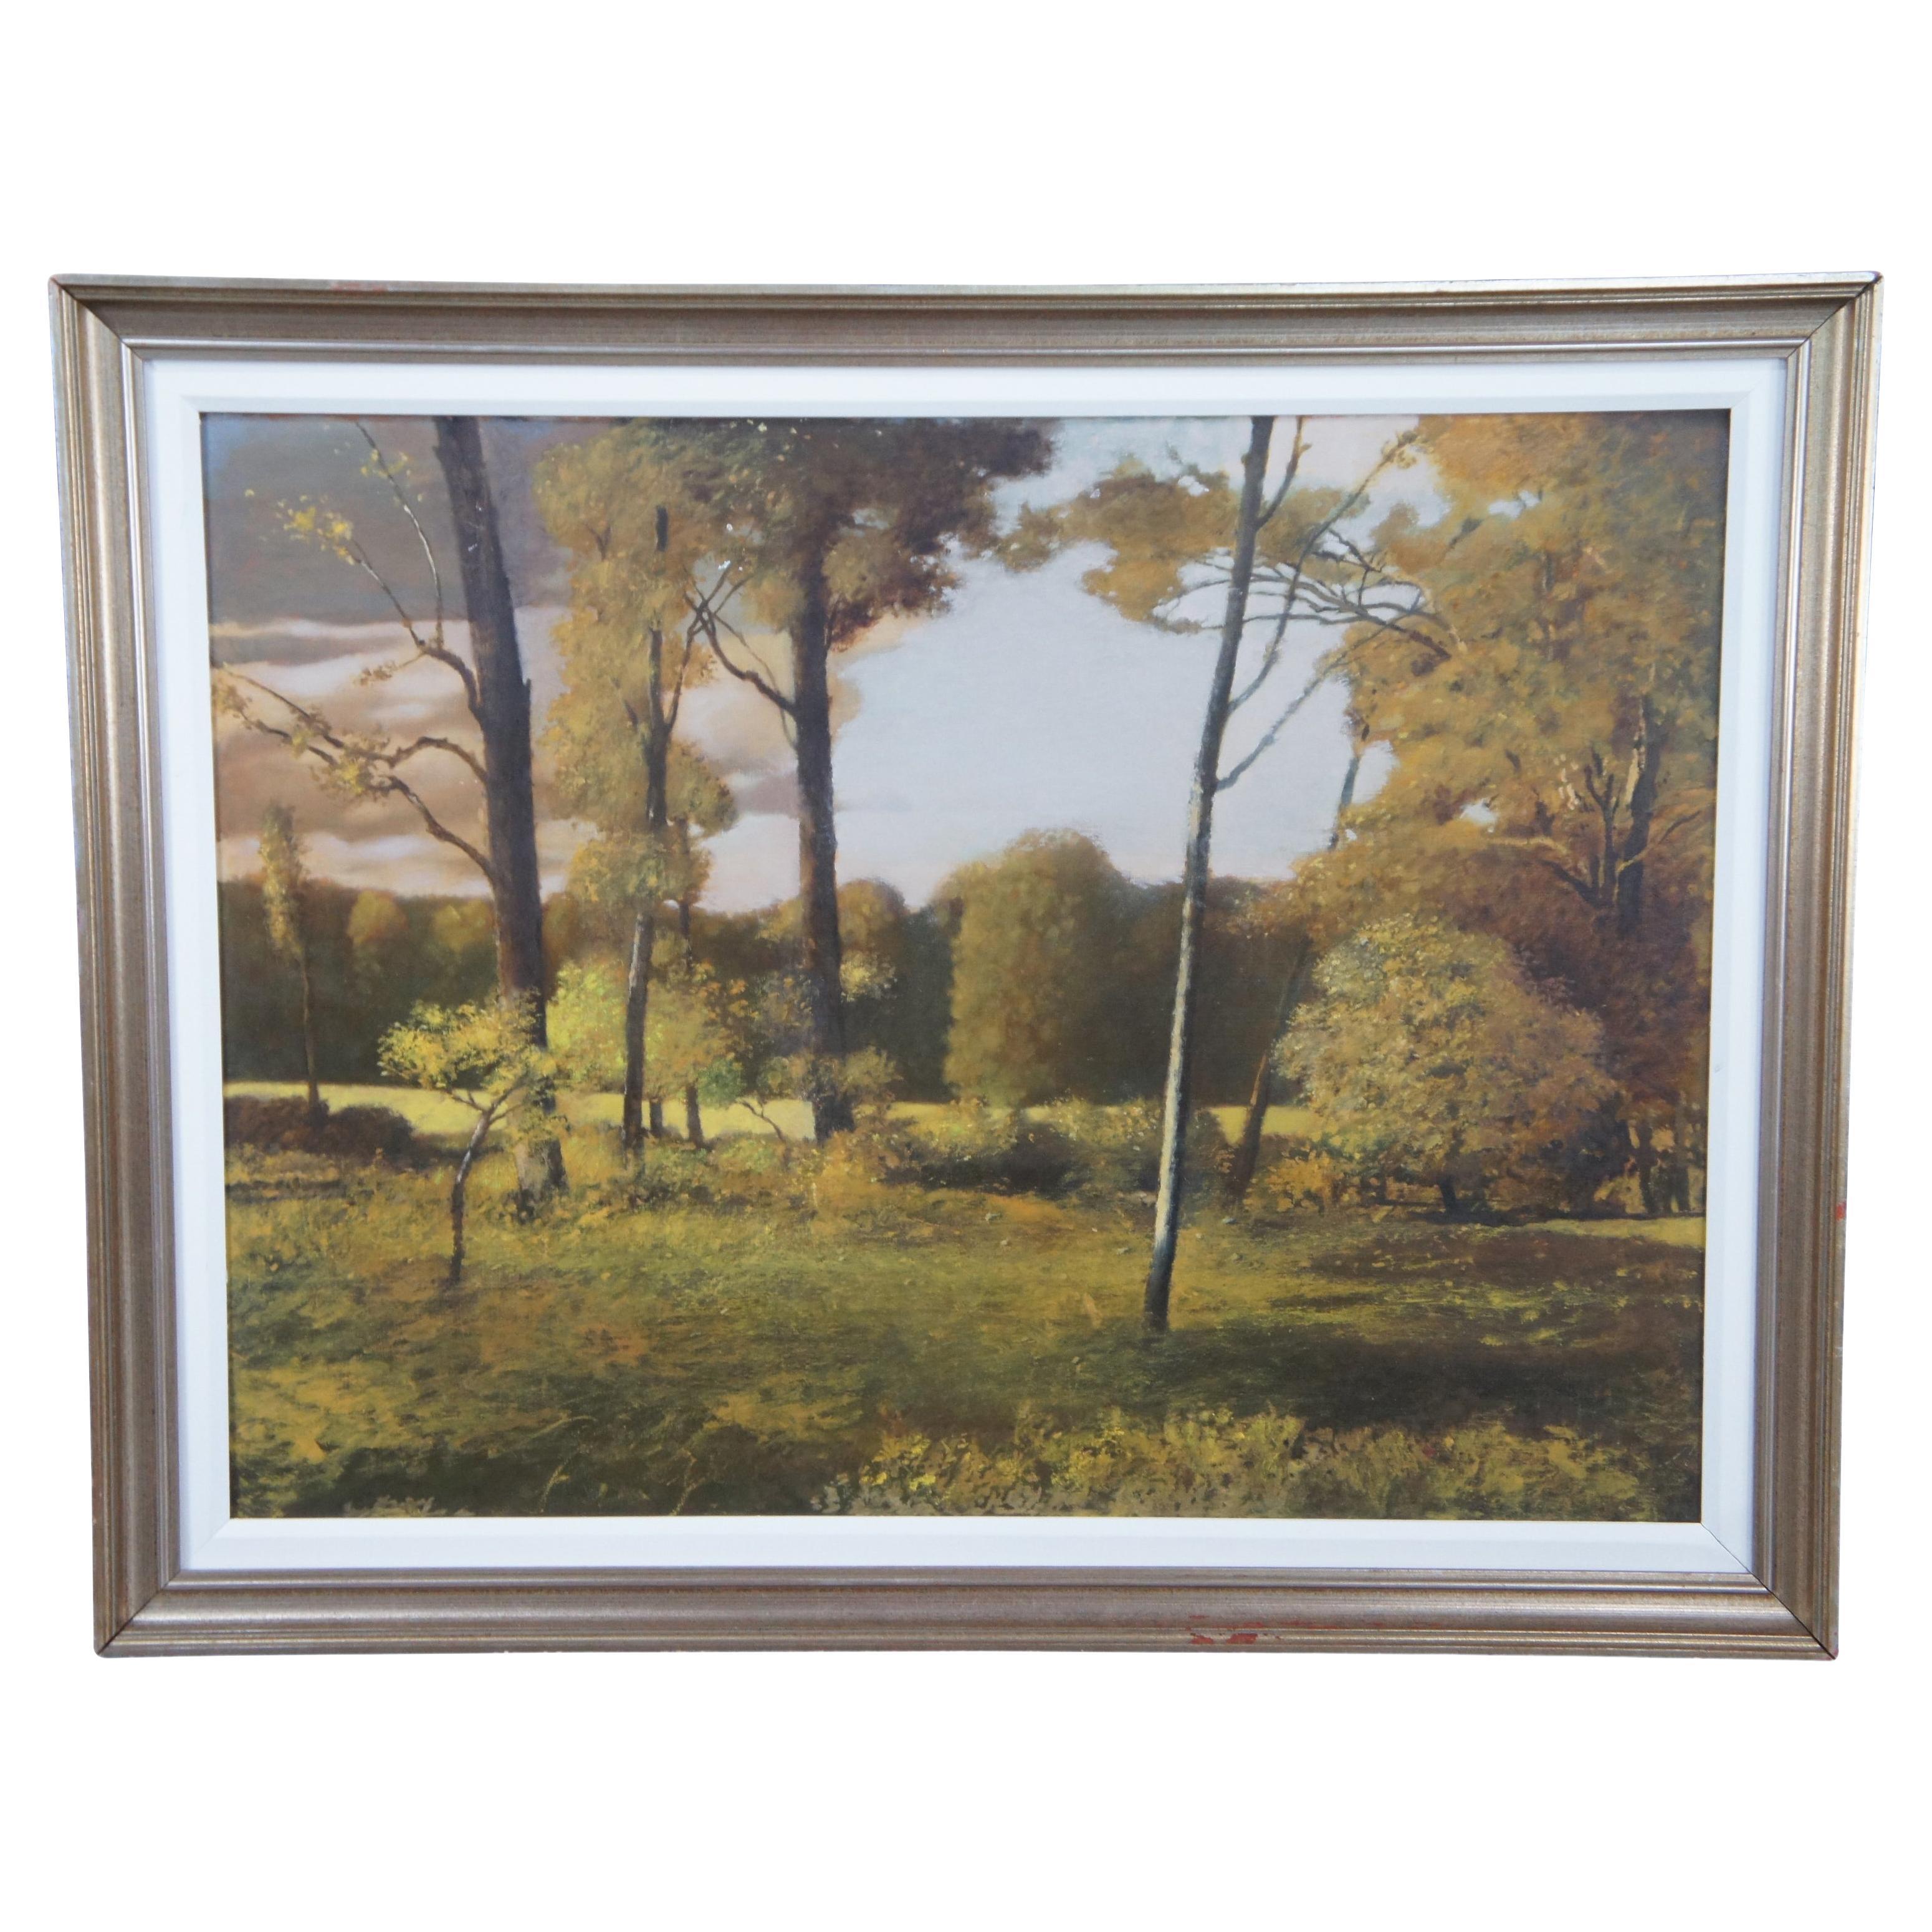 Ronald E. Renmark Forest Trees Field Landscape Oil Painting on Canvas